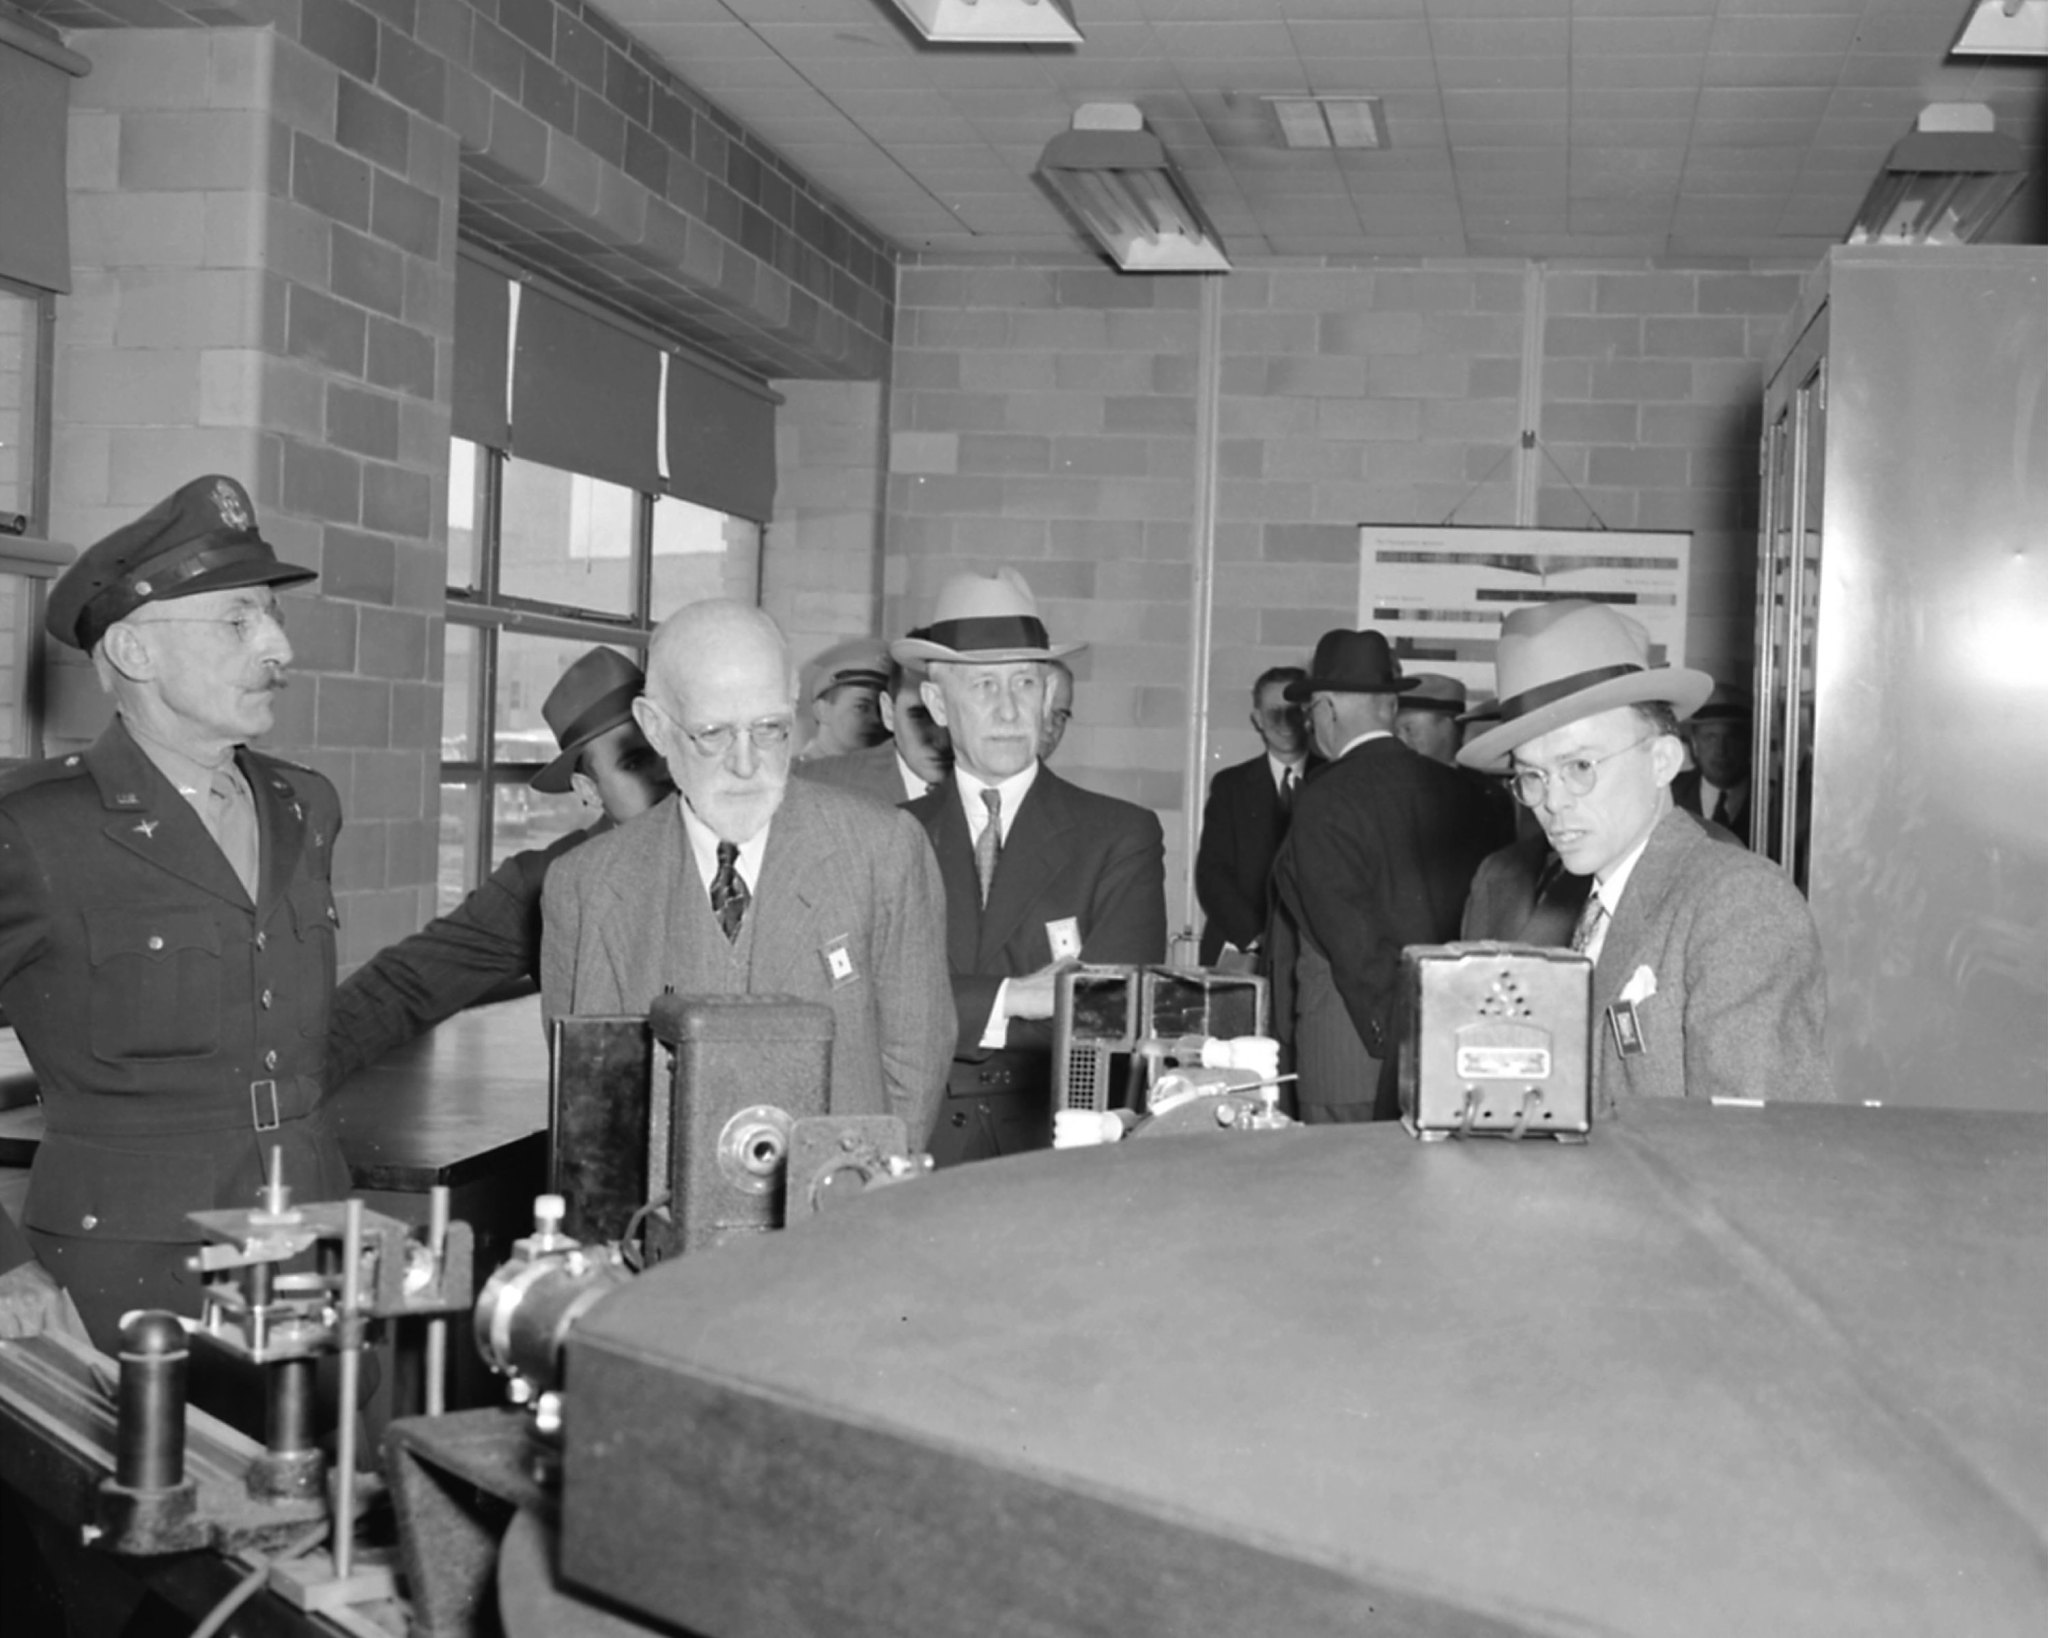 In an image from 1943, Orville Wright inspects some machinery as other men look on.